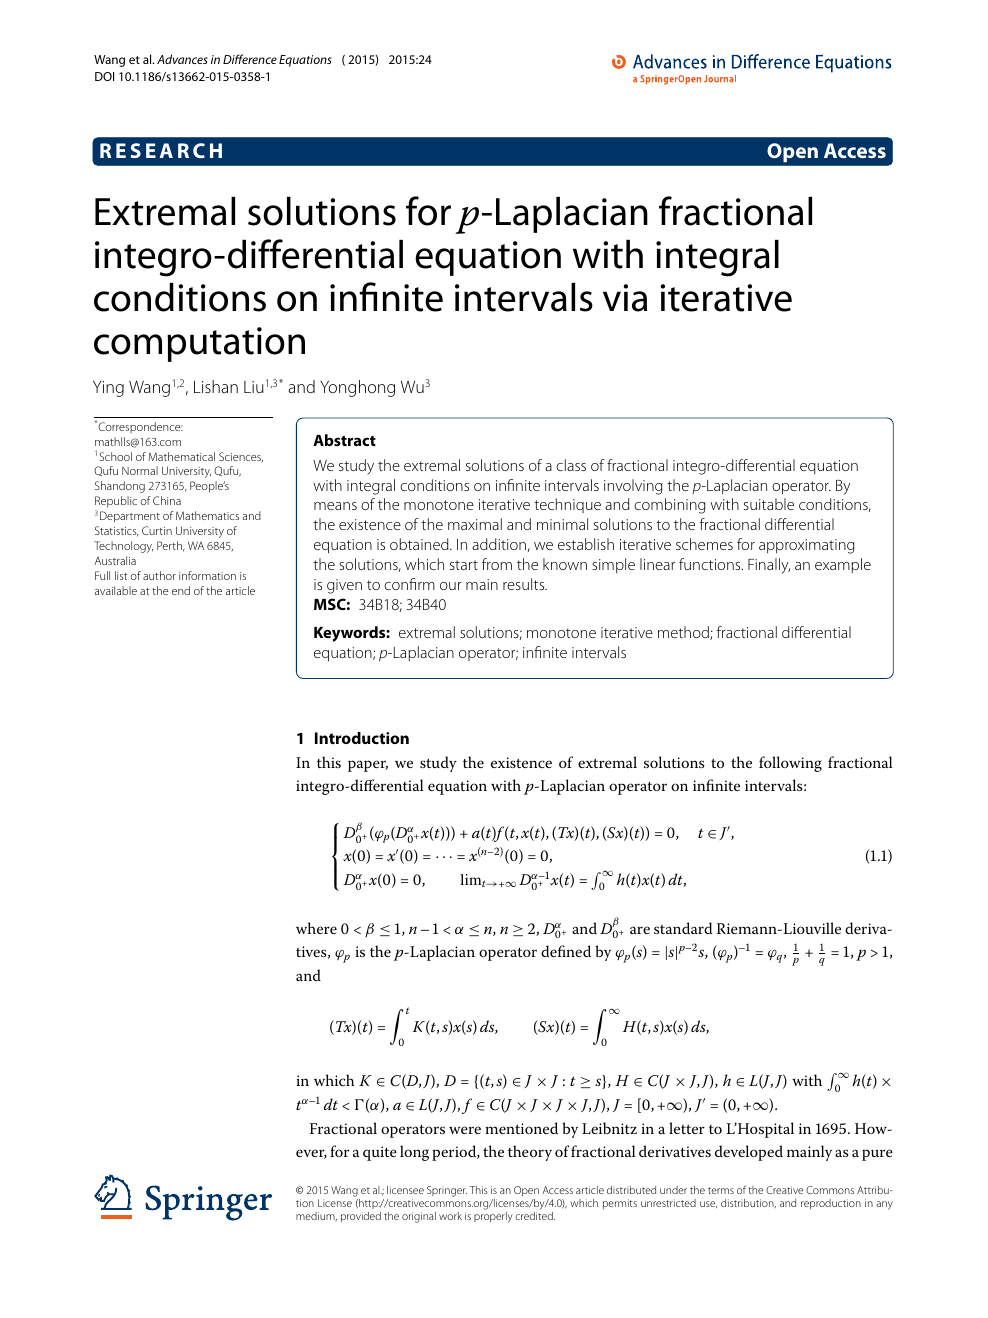 Extremal Solutions For P Laplacian Fractional Integro Differential Equation With Integral Conditions On Infinite Intervals Via Iterative Computation Topic Of Research Paper In Mathematics Download Scholarly Article Pdf And Read For Free On